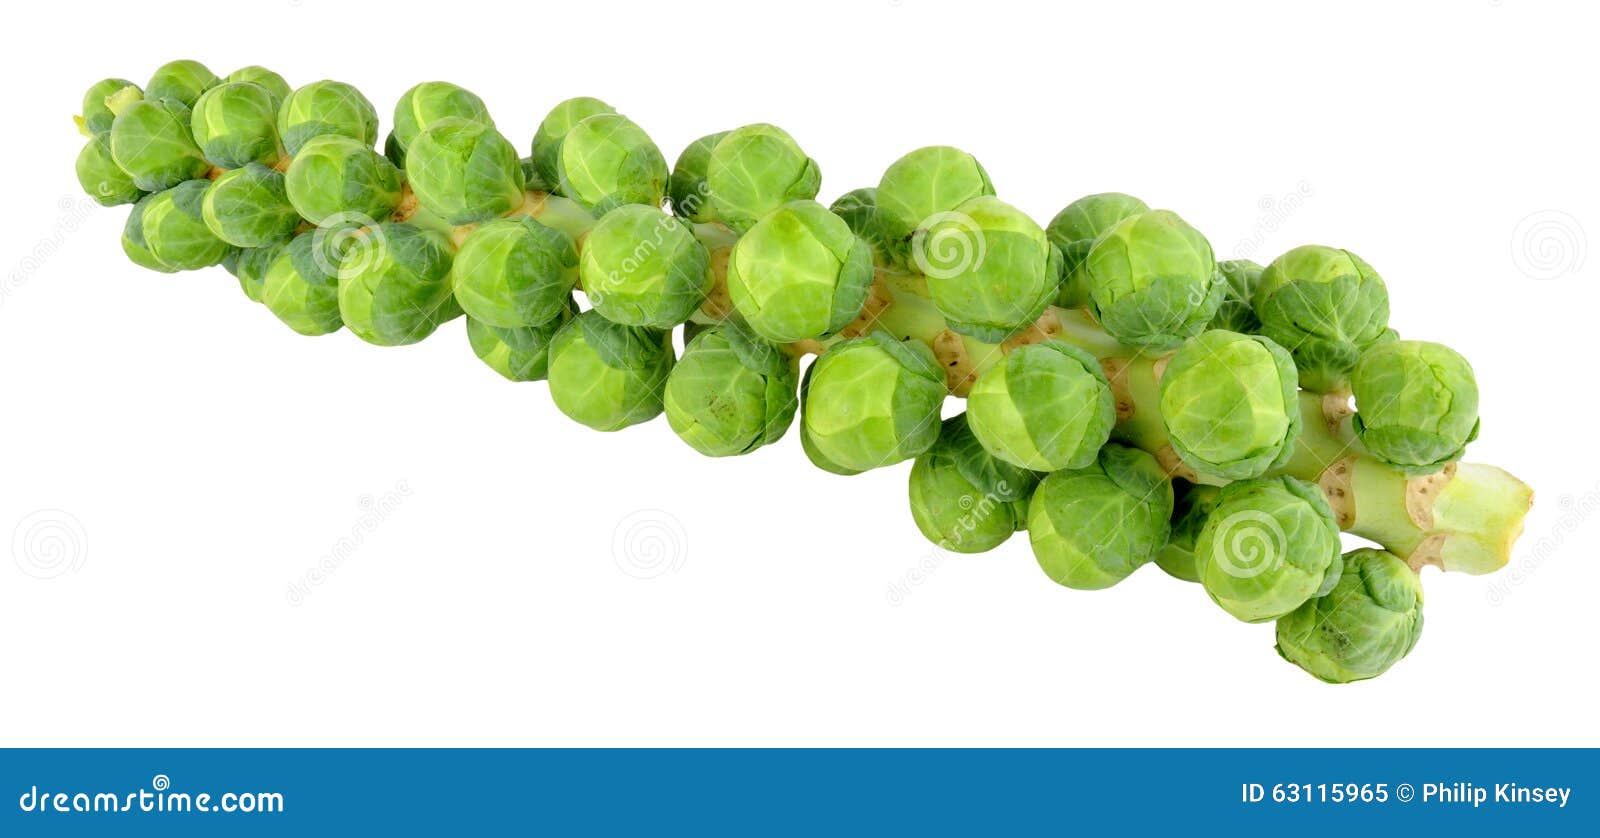 brussels sprout stalks